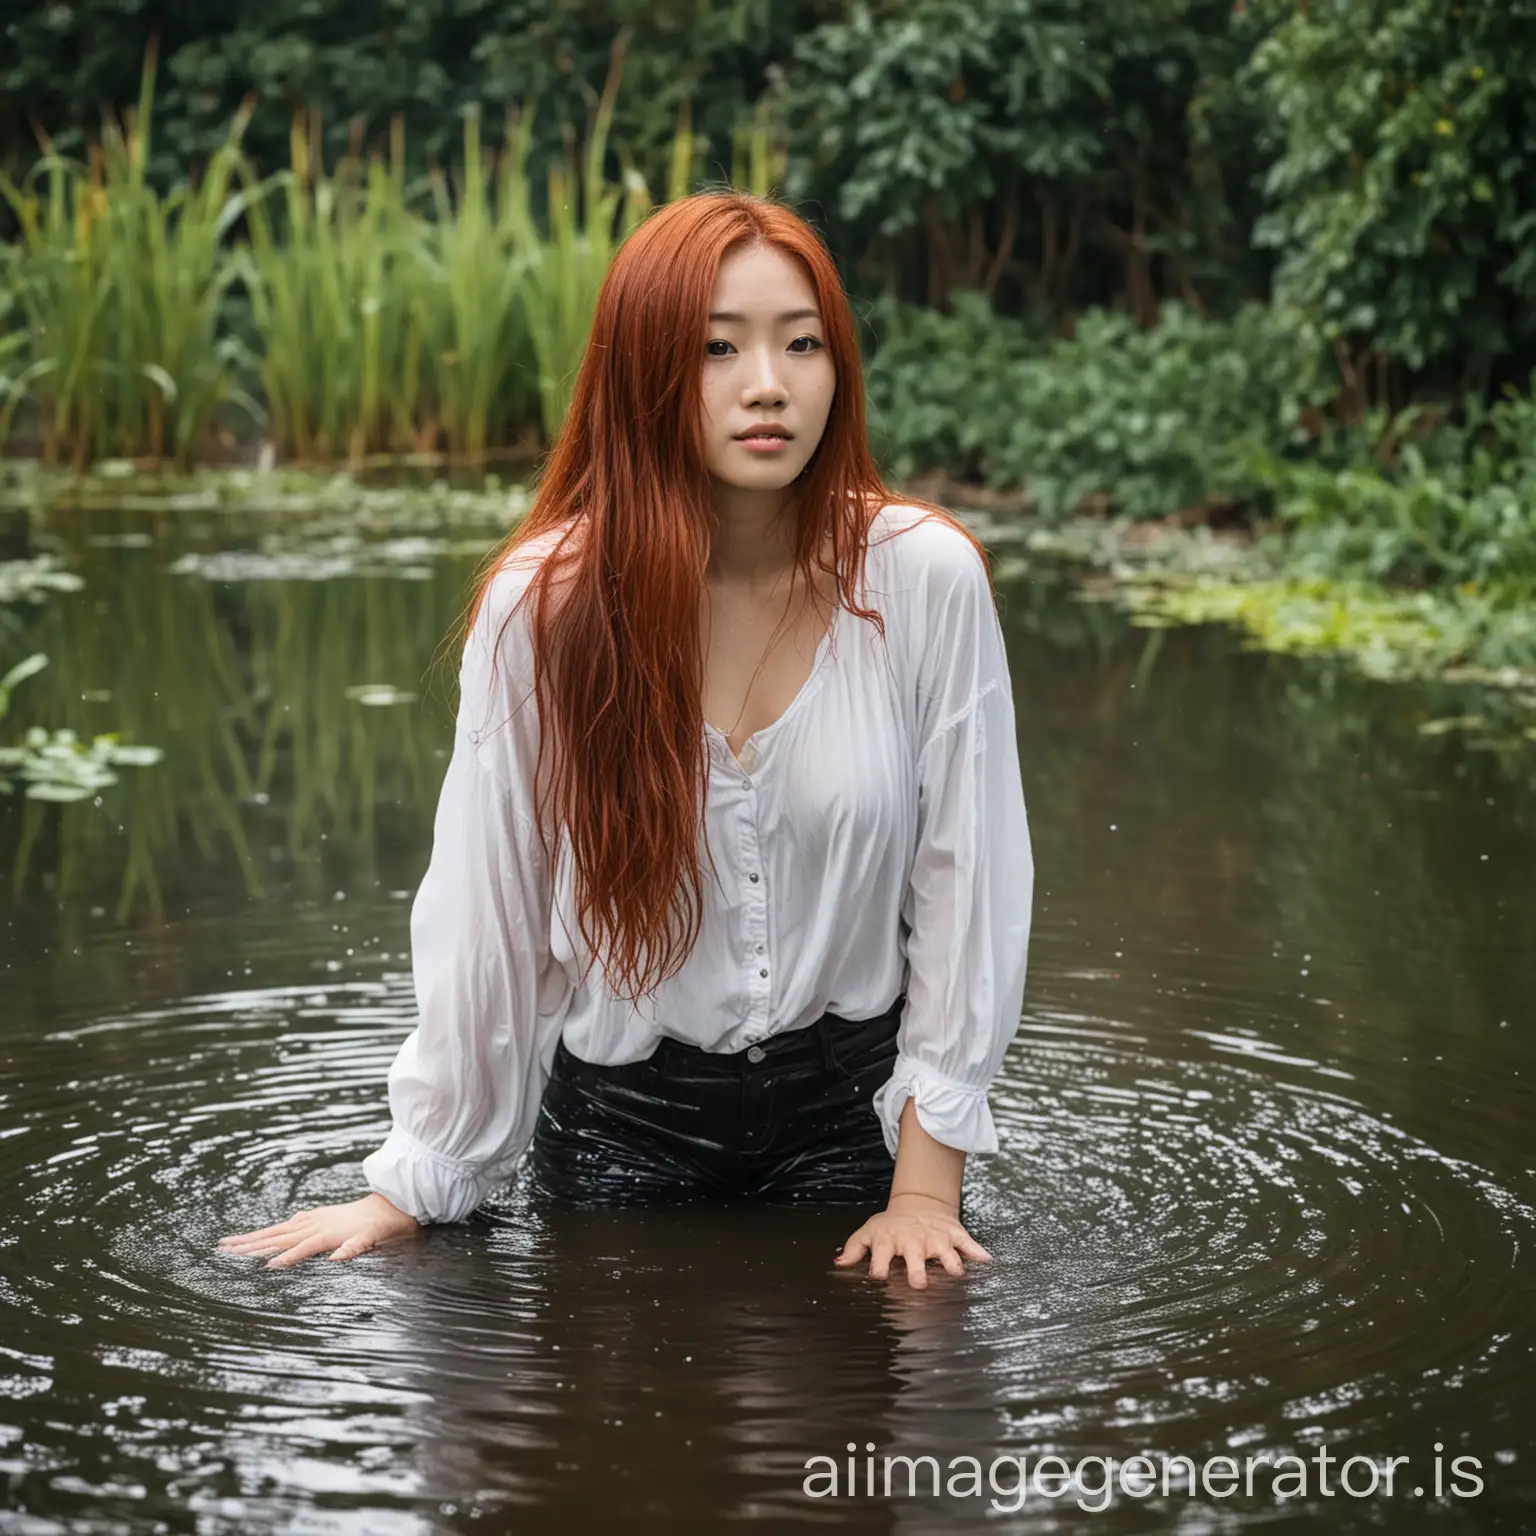 Young-Asian-Woman-with-Long-Red-Hair-Standing-in-Wet-Pond